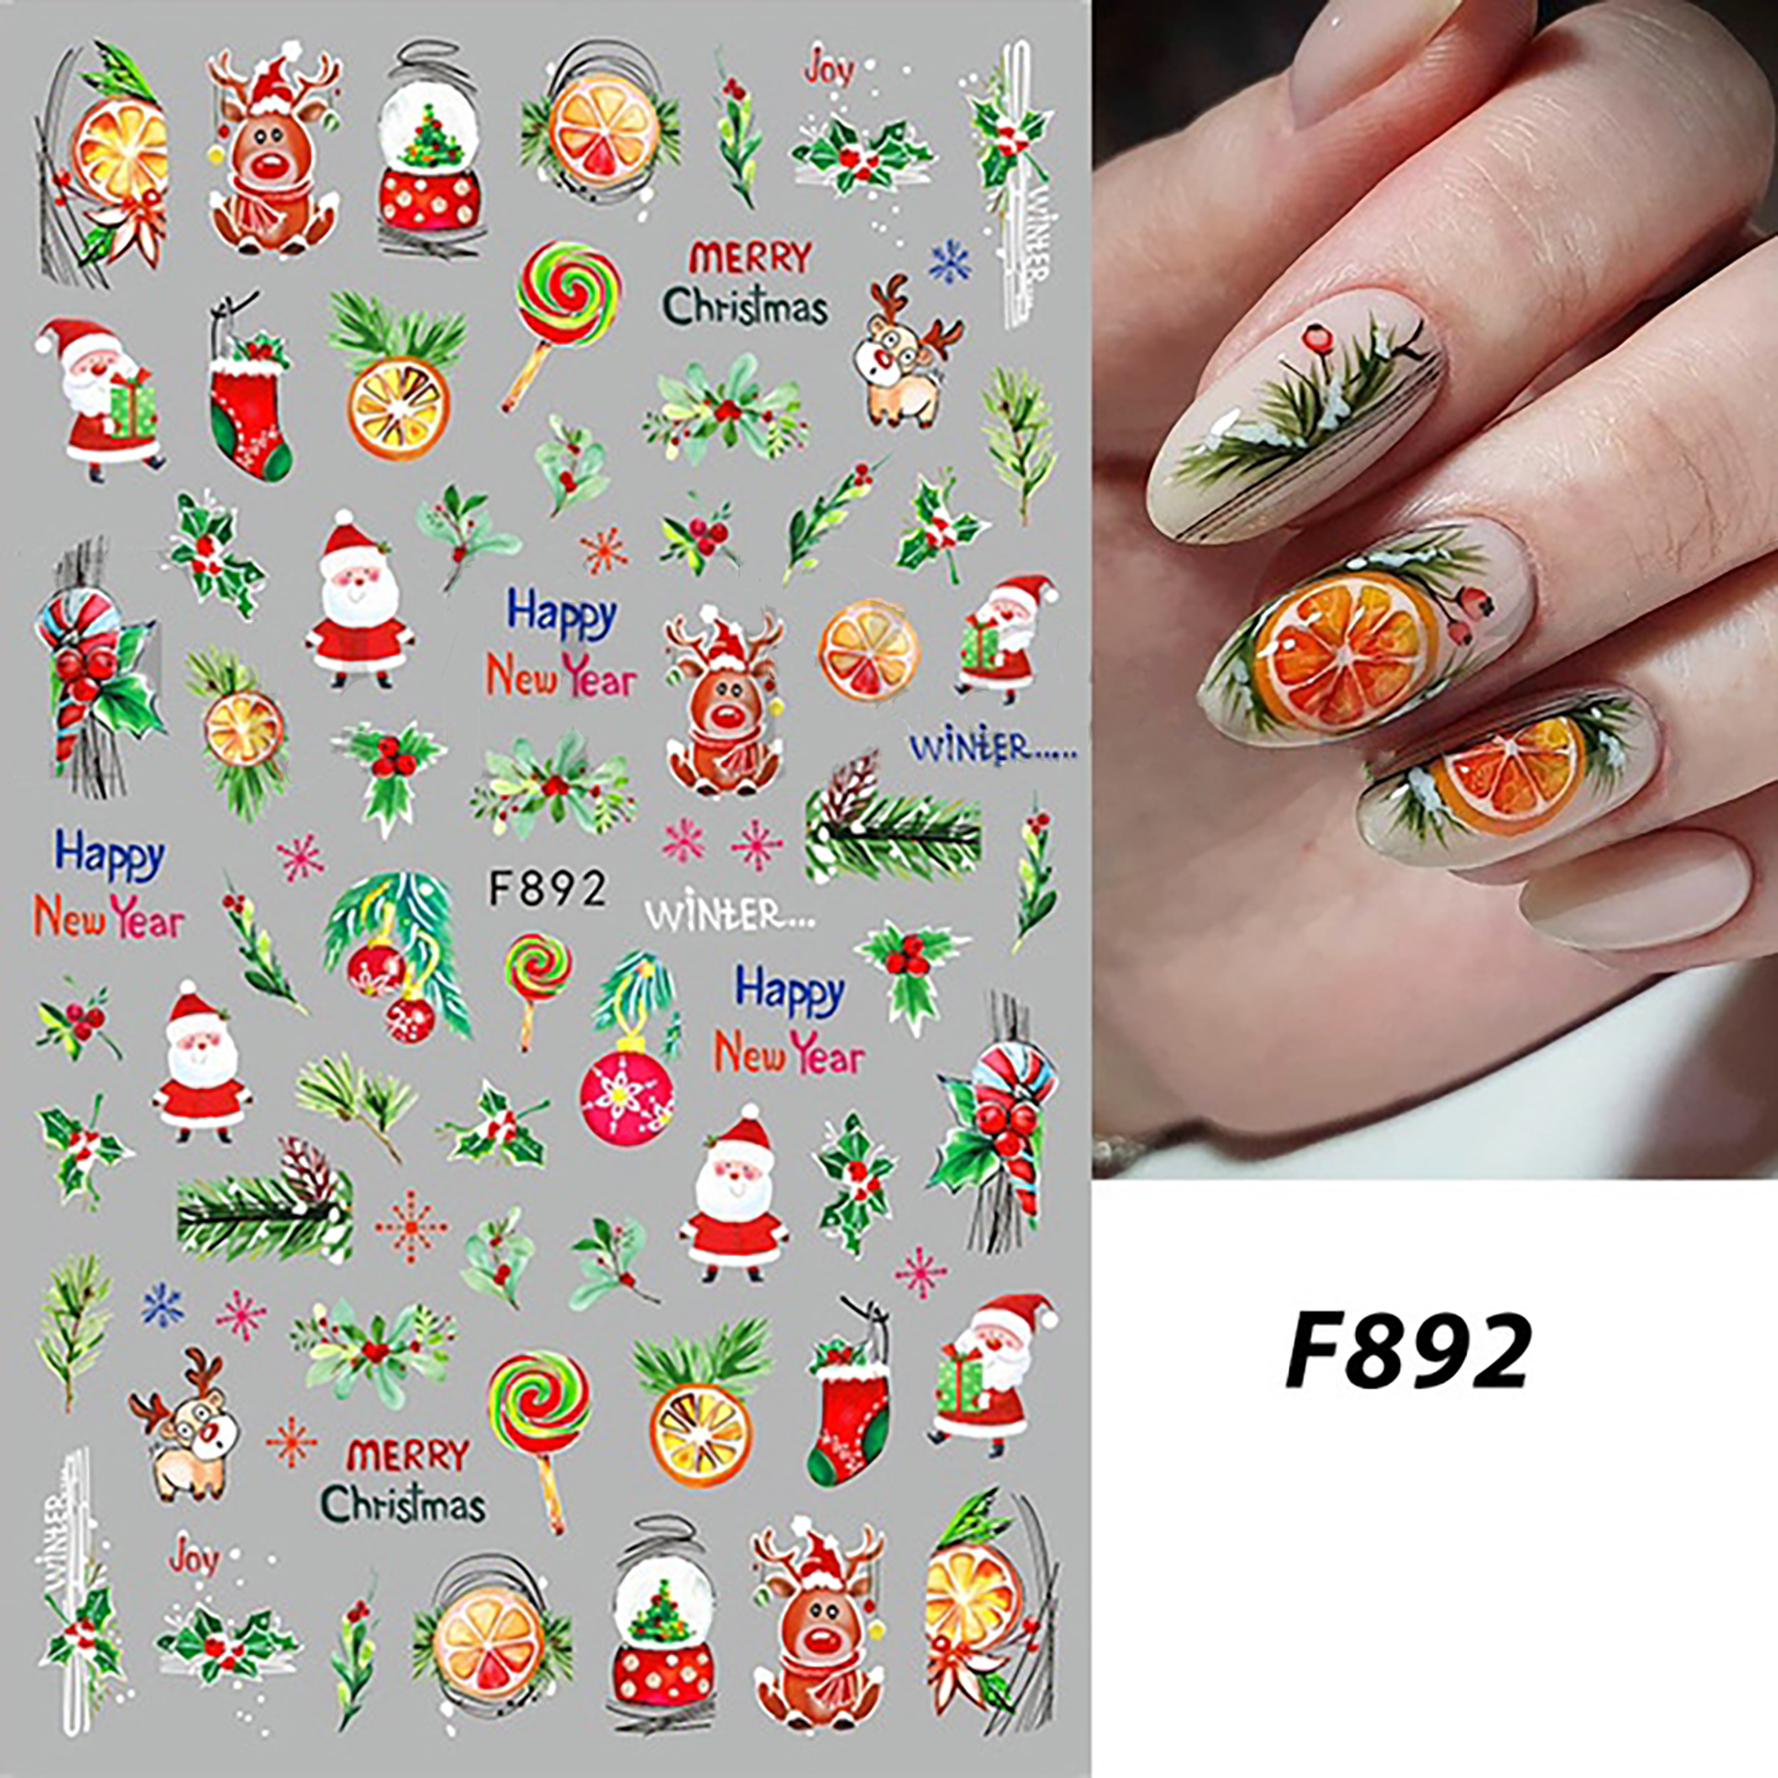 Spring 3D Nail Stickers Leaf Flowers Line Patterns Nail Decals Manicure DIY  | eBay